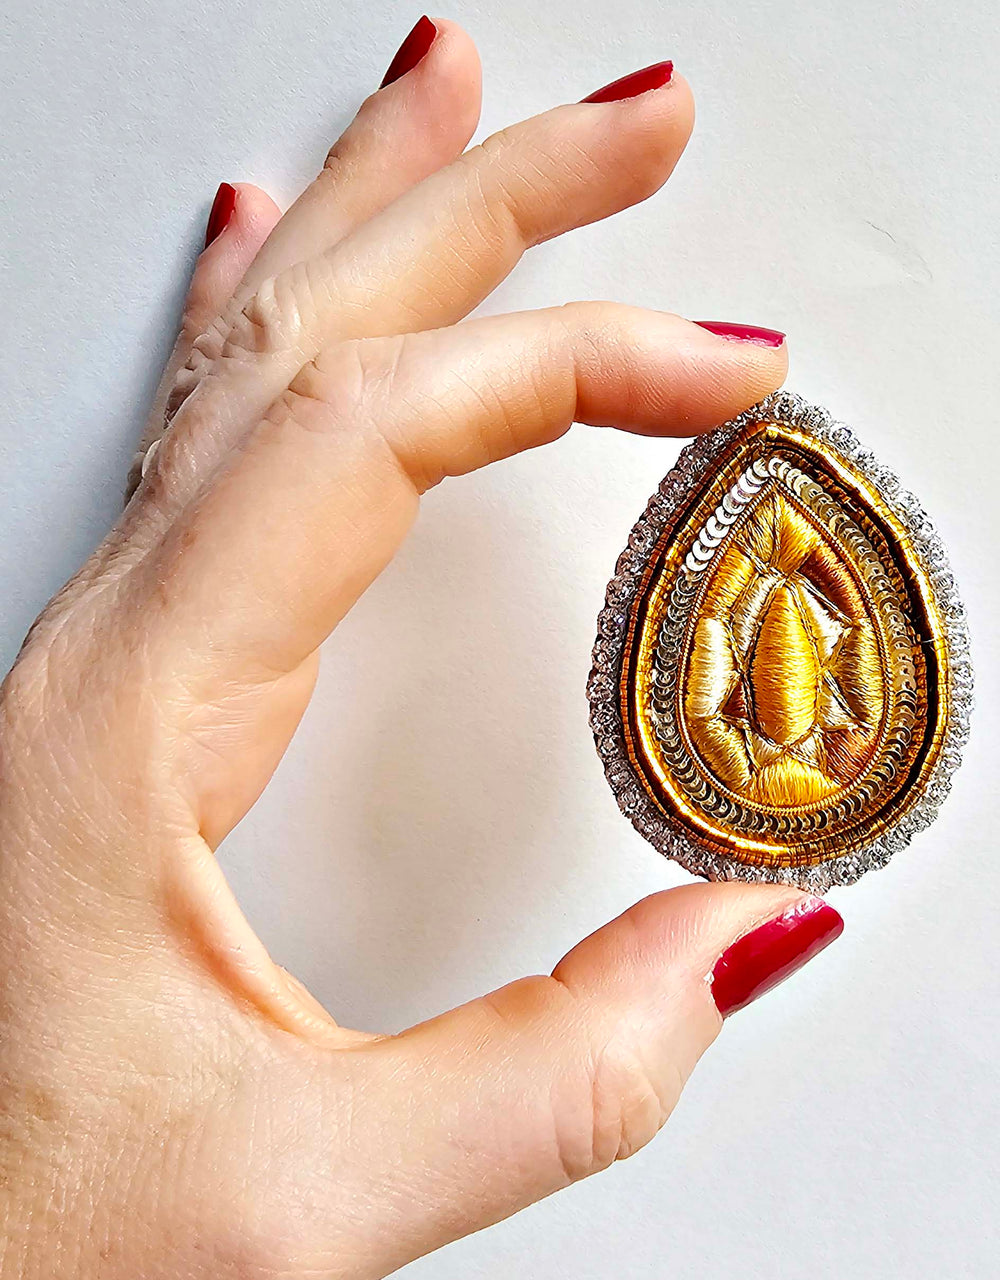 Citrine trompe l'oeil brooch / Pre-order, available end of October